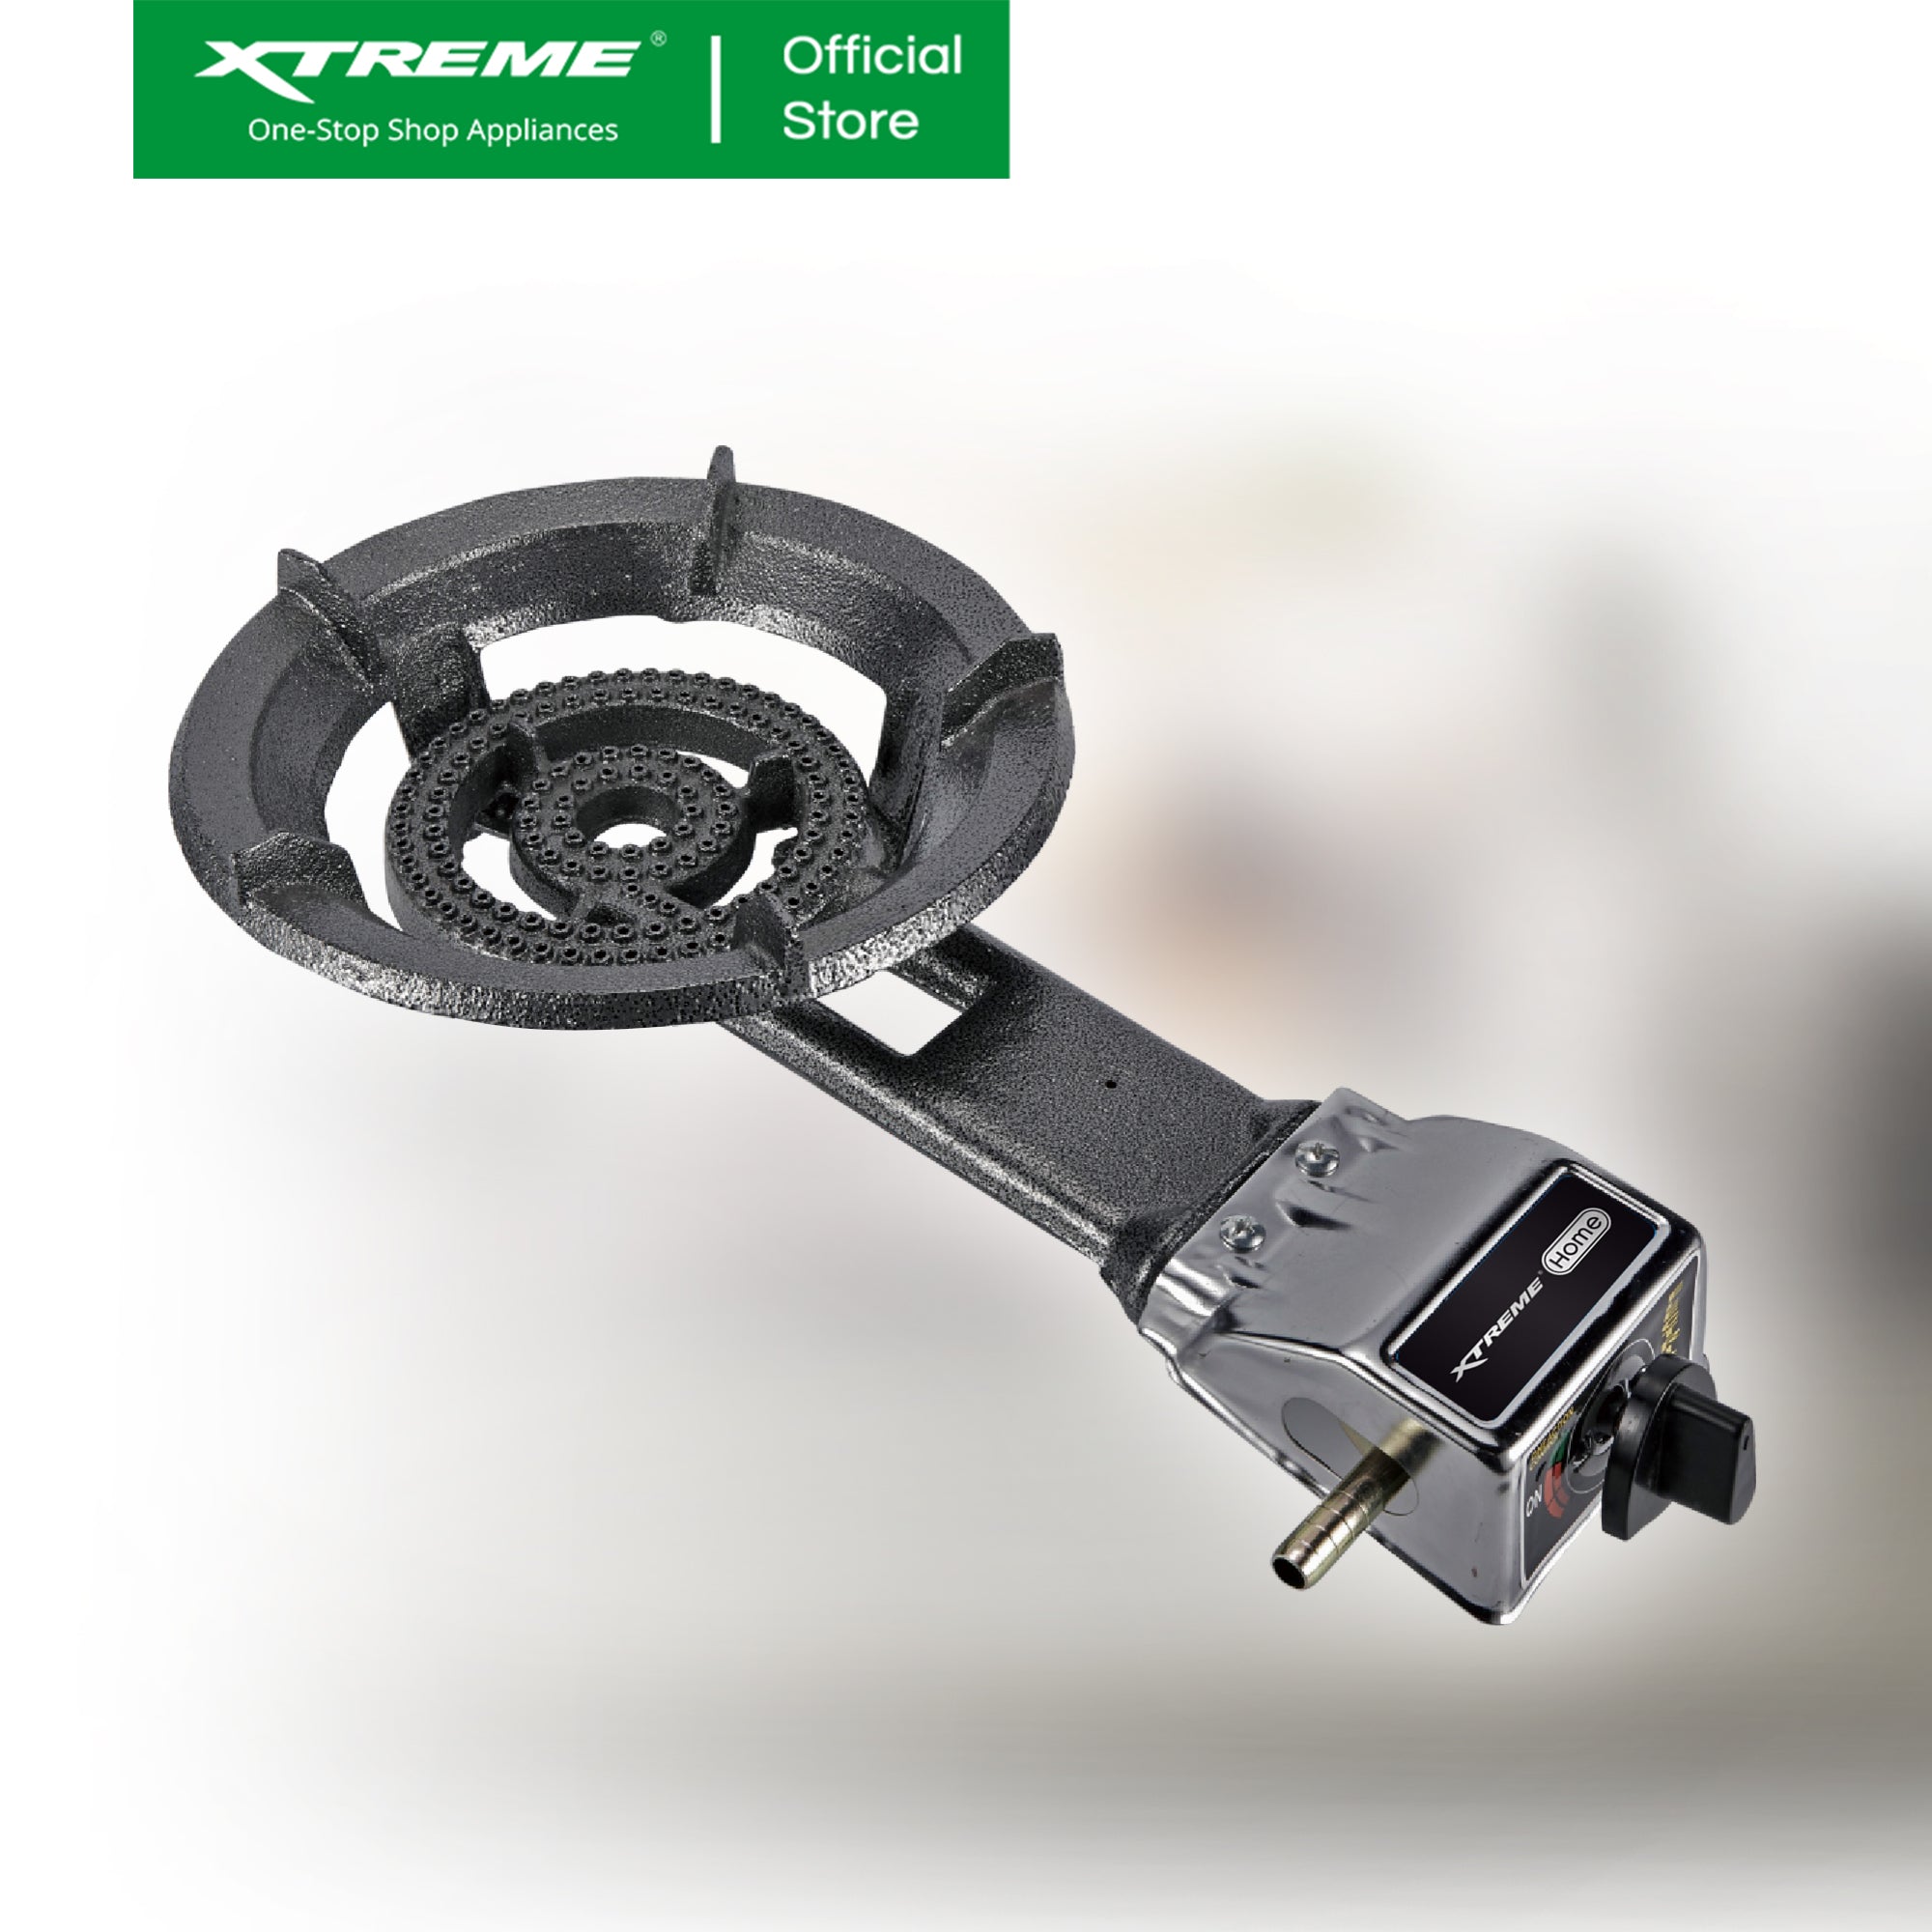 X-Series 1-Burner Commercial Gas Stove | XGS-HIFIX